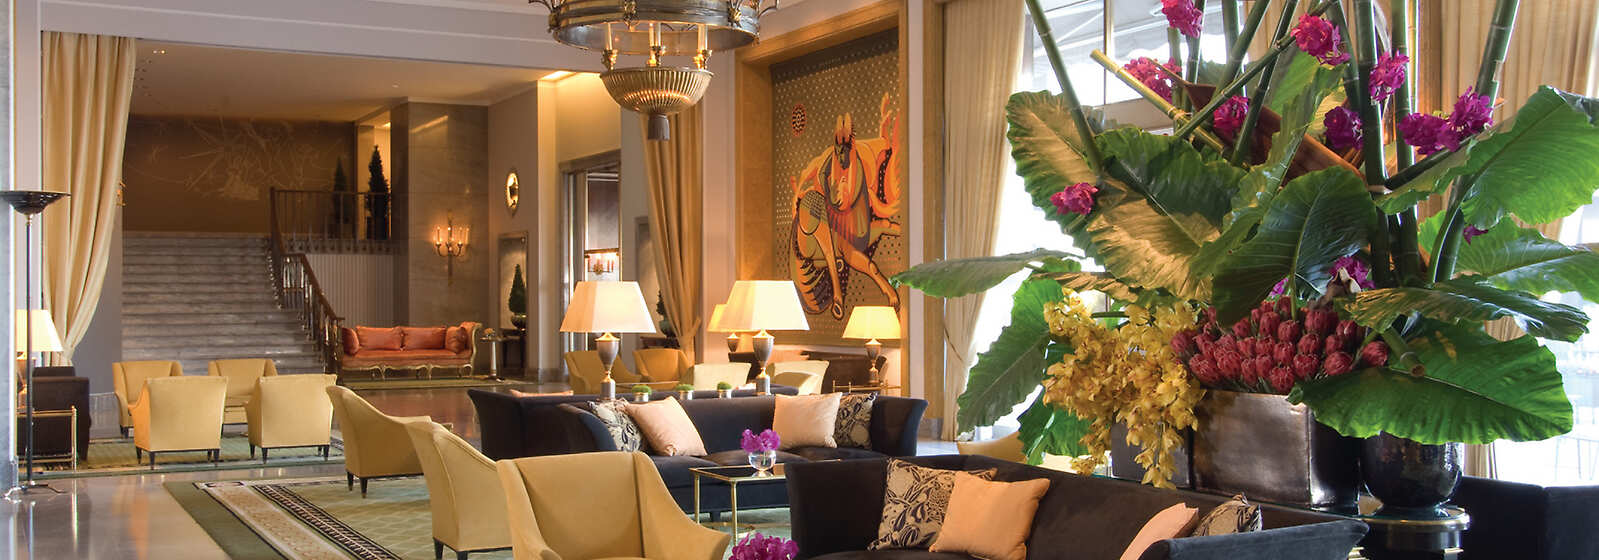 Walk through the Hotel’s outstanding art collection